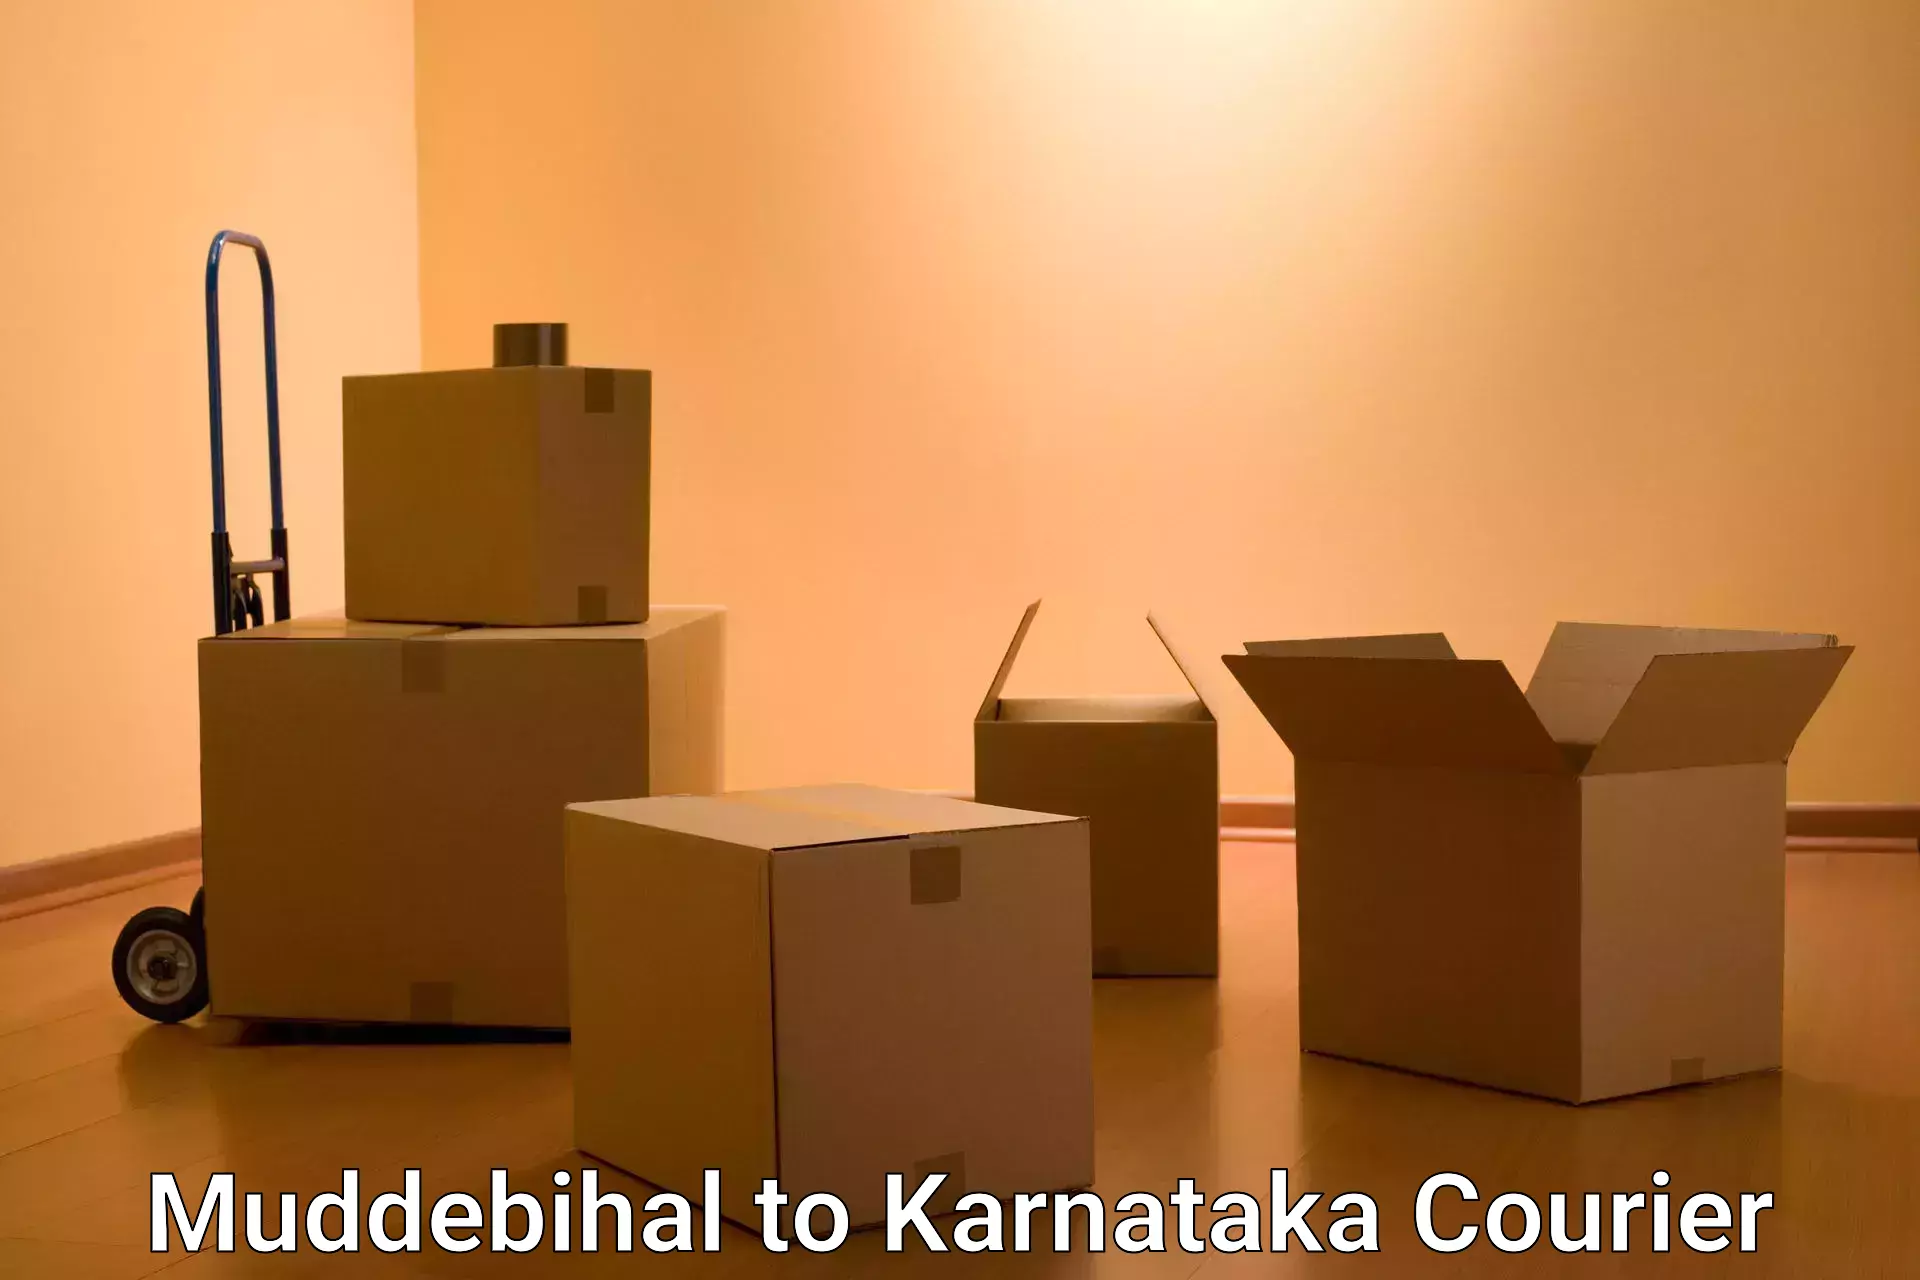 Professional courier handling Muddebihal to Manipal